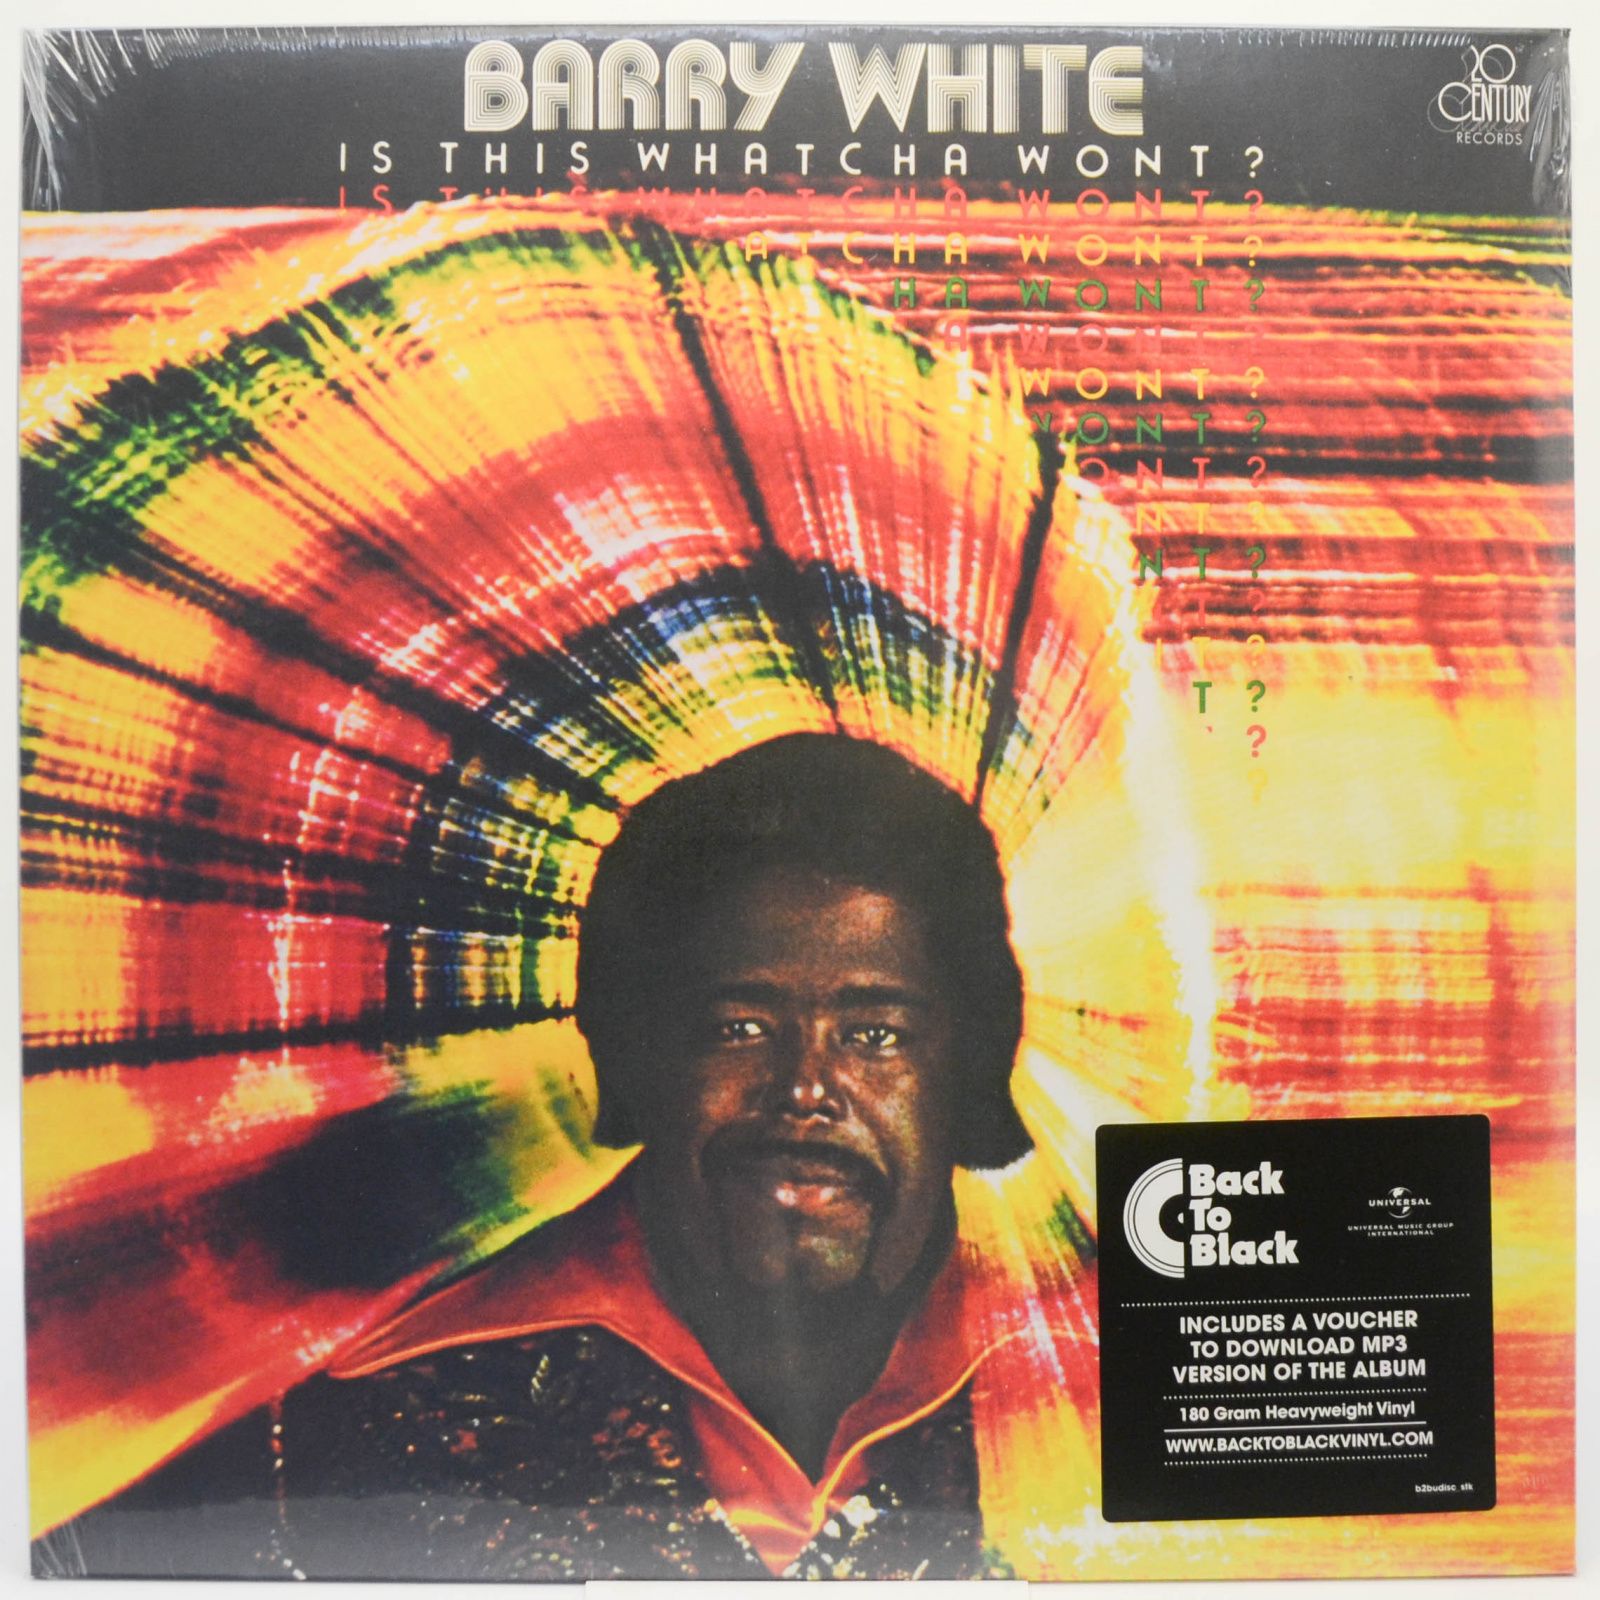 Barry White — Is This Whatcha Wont?, 2018